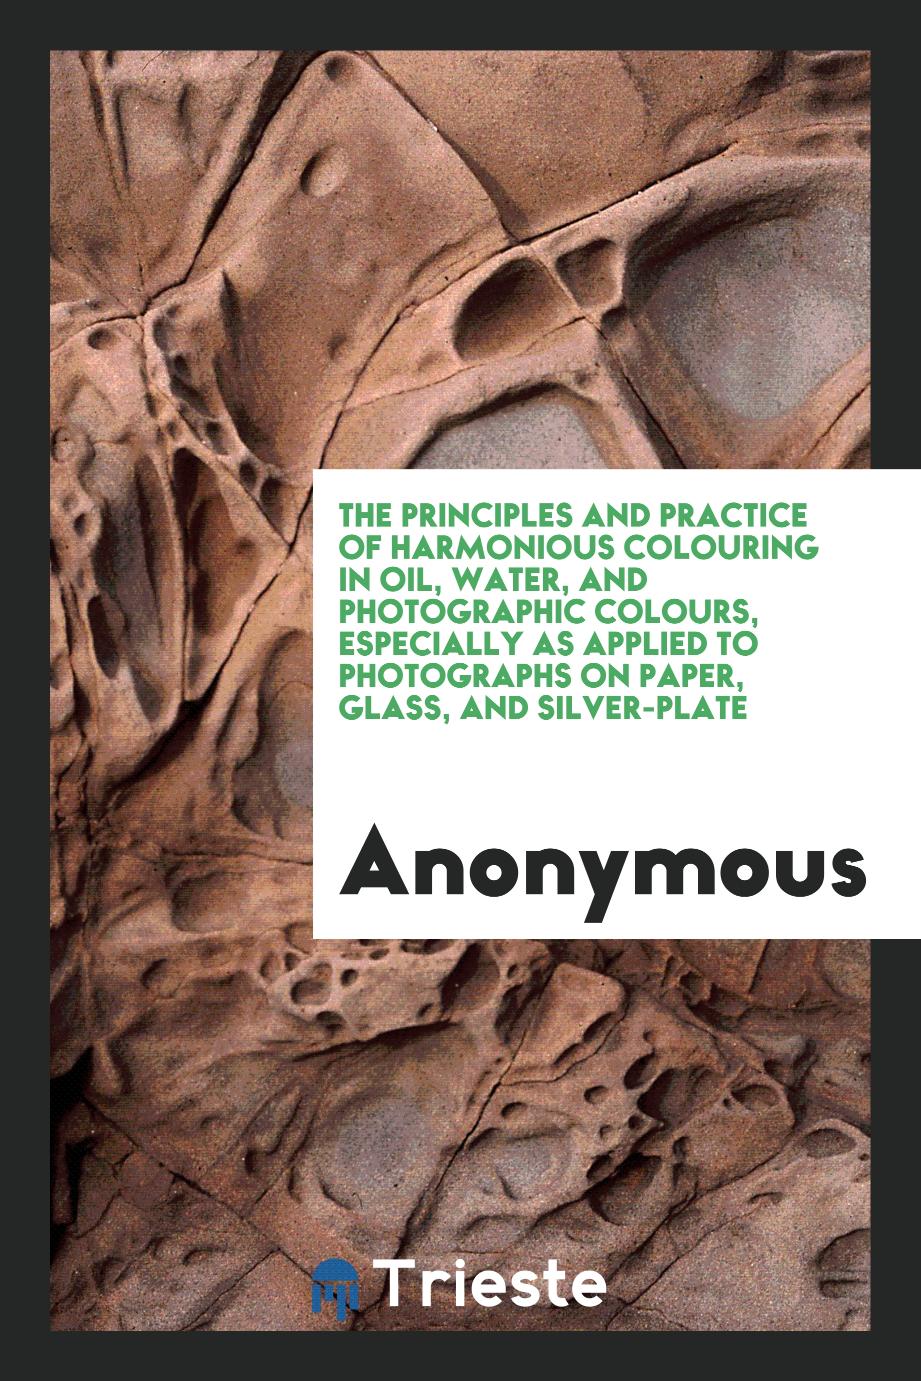 The Principles and Practice of Harmonious Colouring in Oil, Water, and Photographic Colours, Especially as Applied to Photographs on Paper, Glass, and Silver-Plate